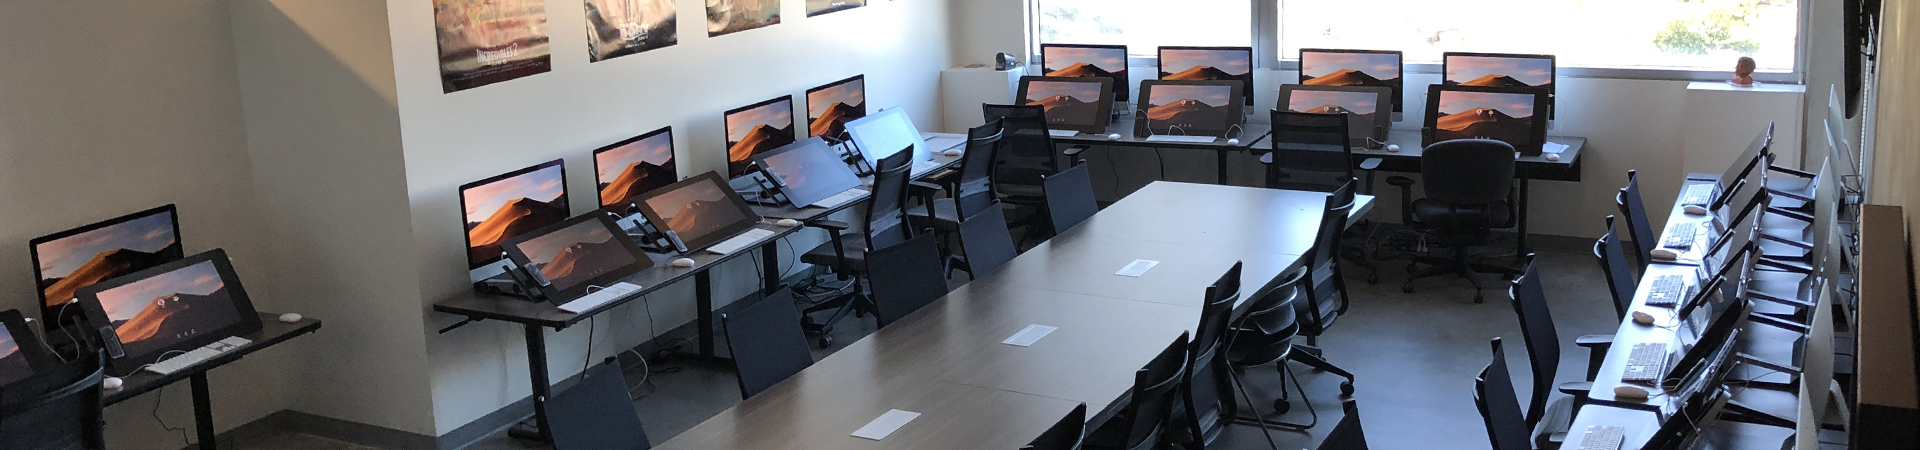 Studio room with tables, chairs, and computers for students to work